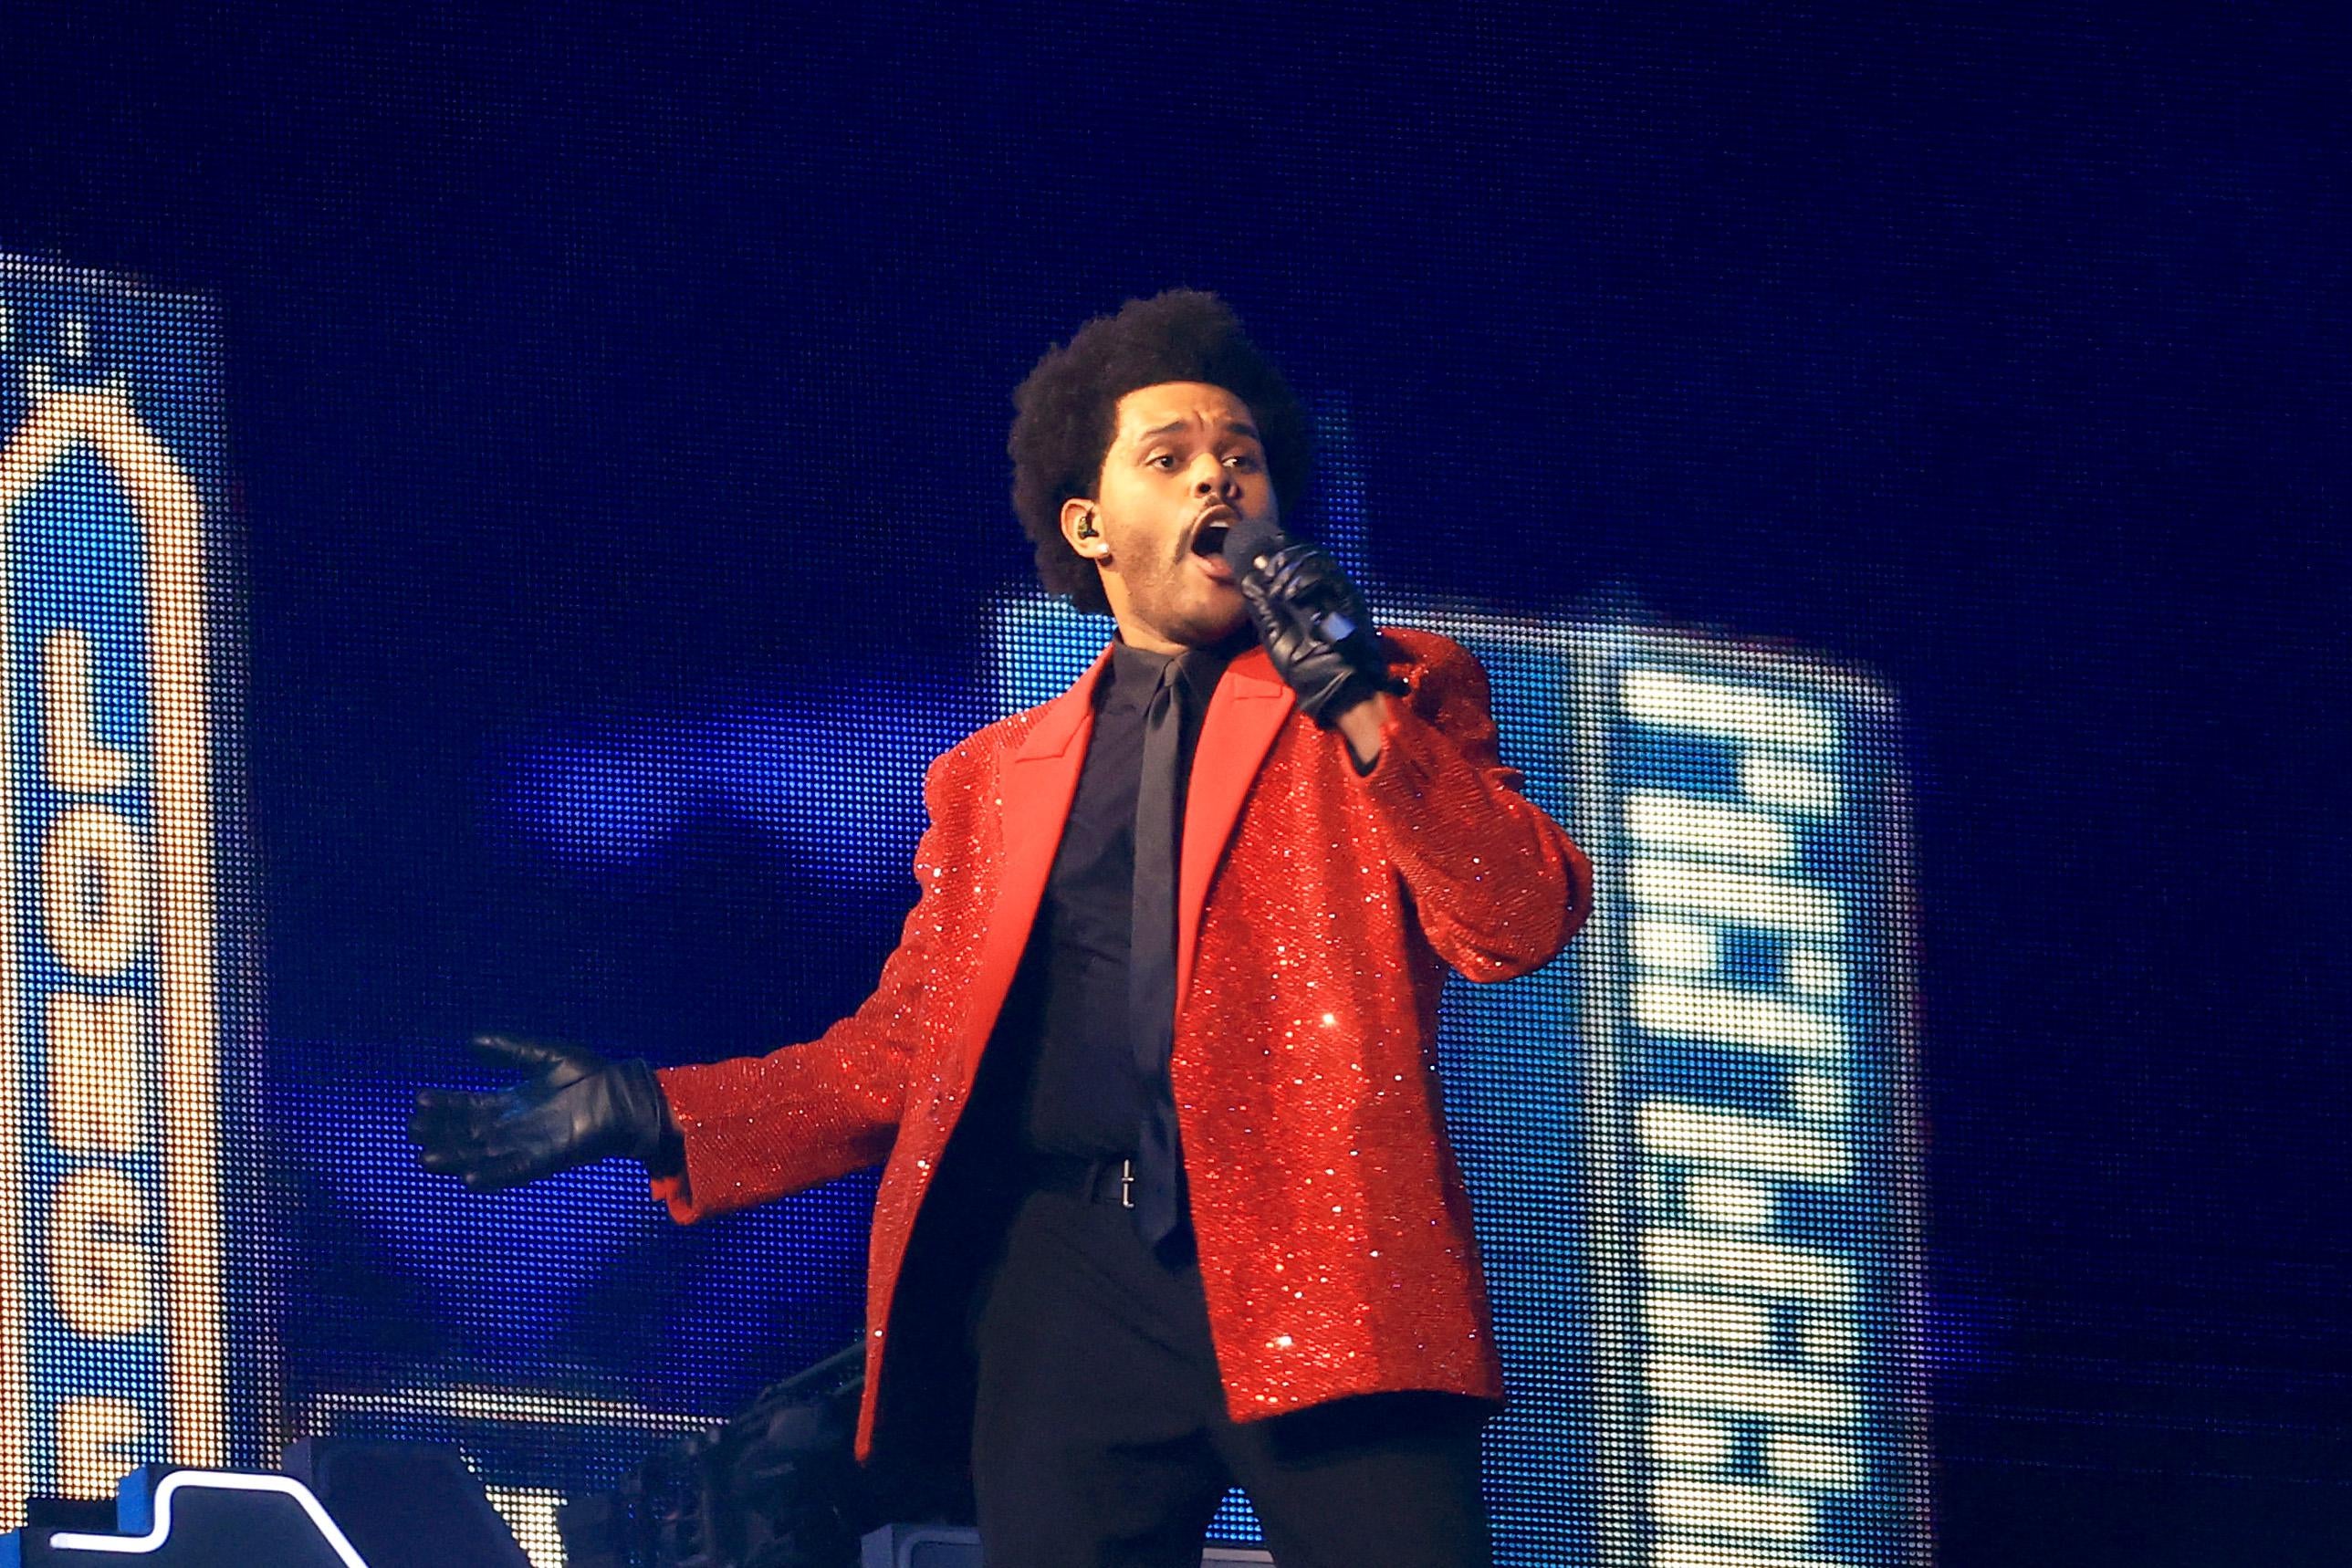 The Weeknd, in a red jacket and black suit, singing into a microphone at the Super Bowl.